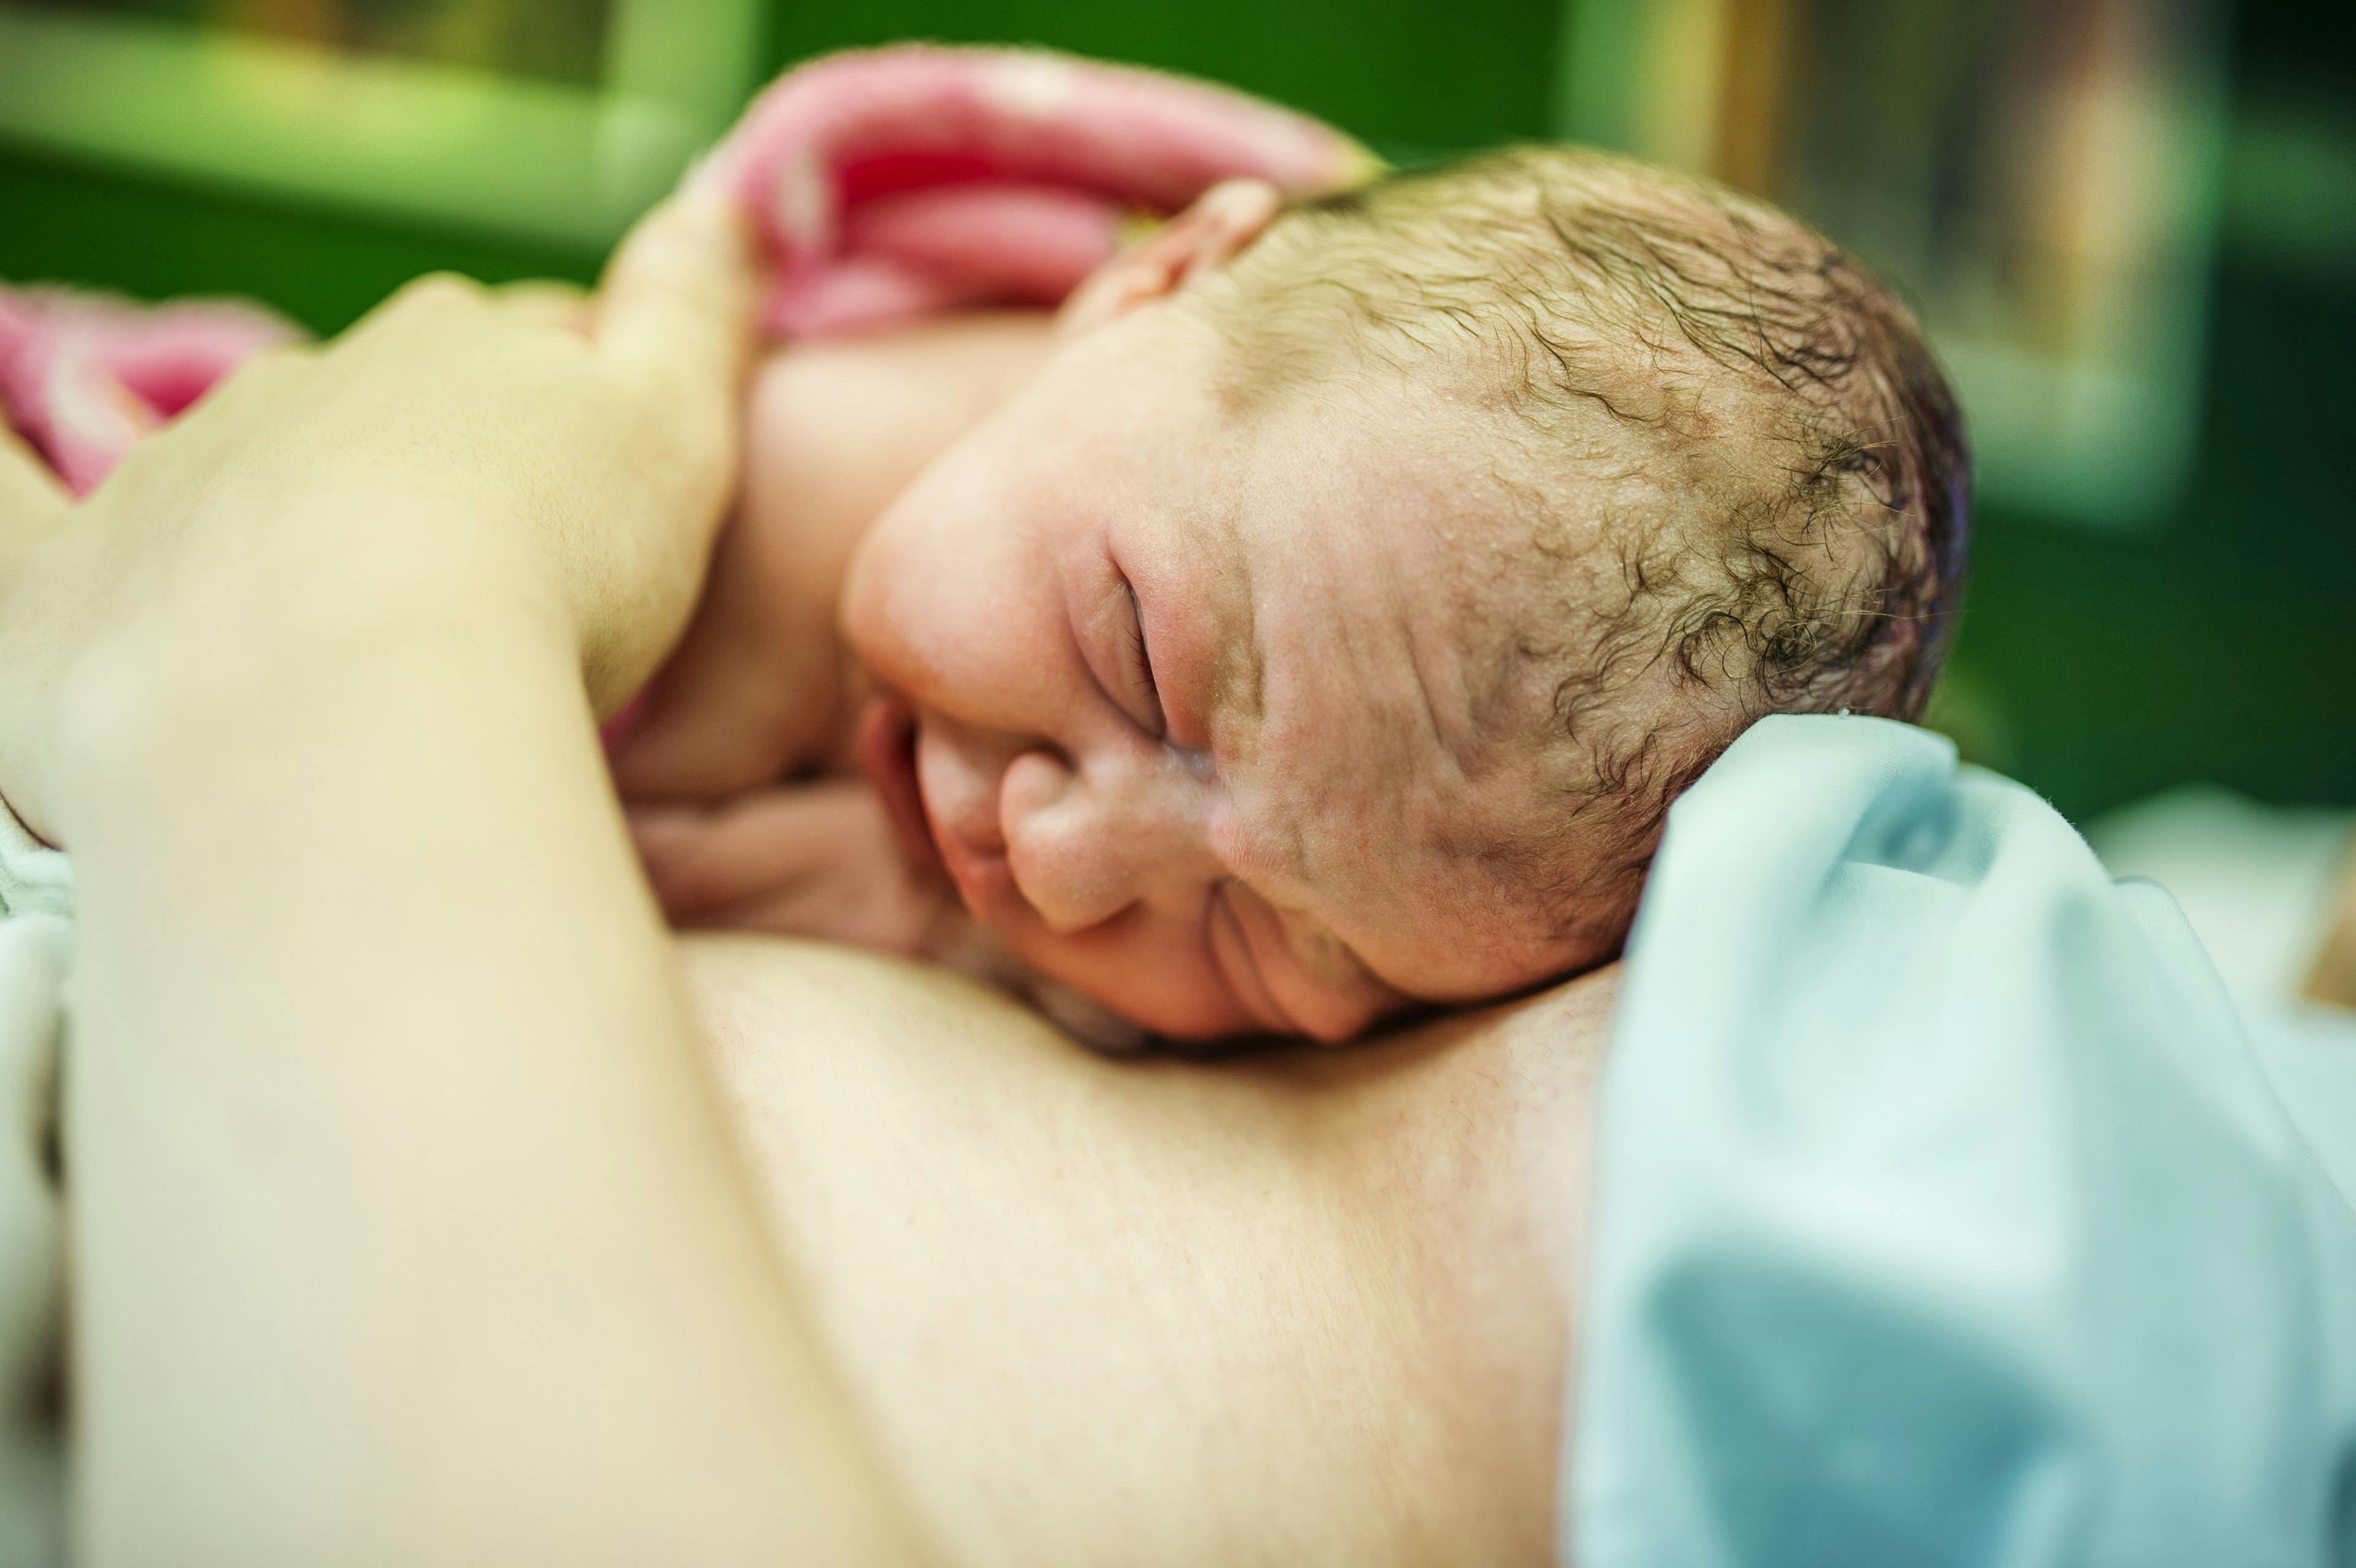 Skin-to-skin contact in the neonatal intensive care unit